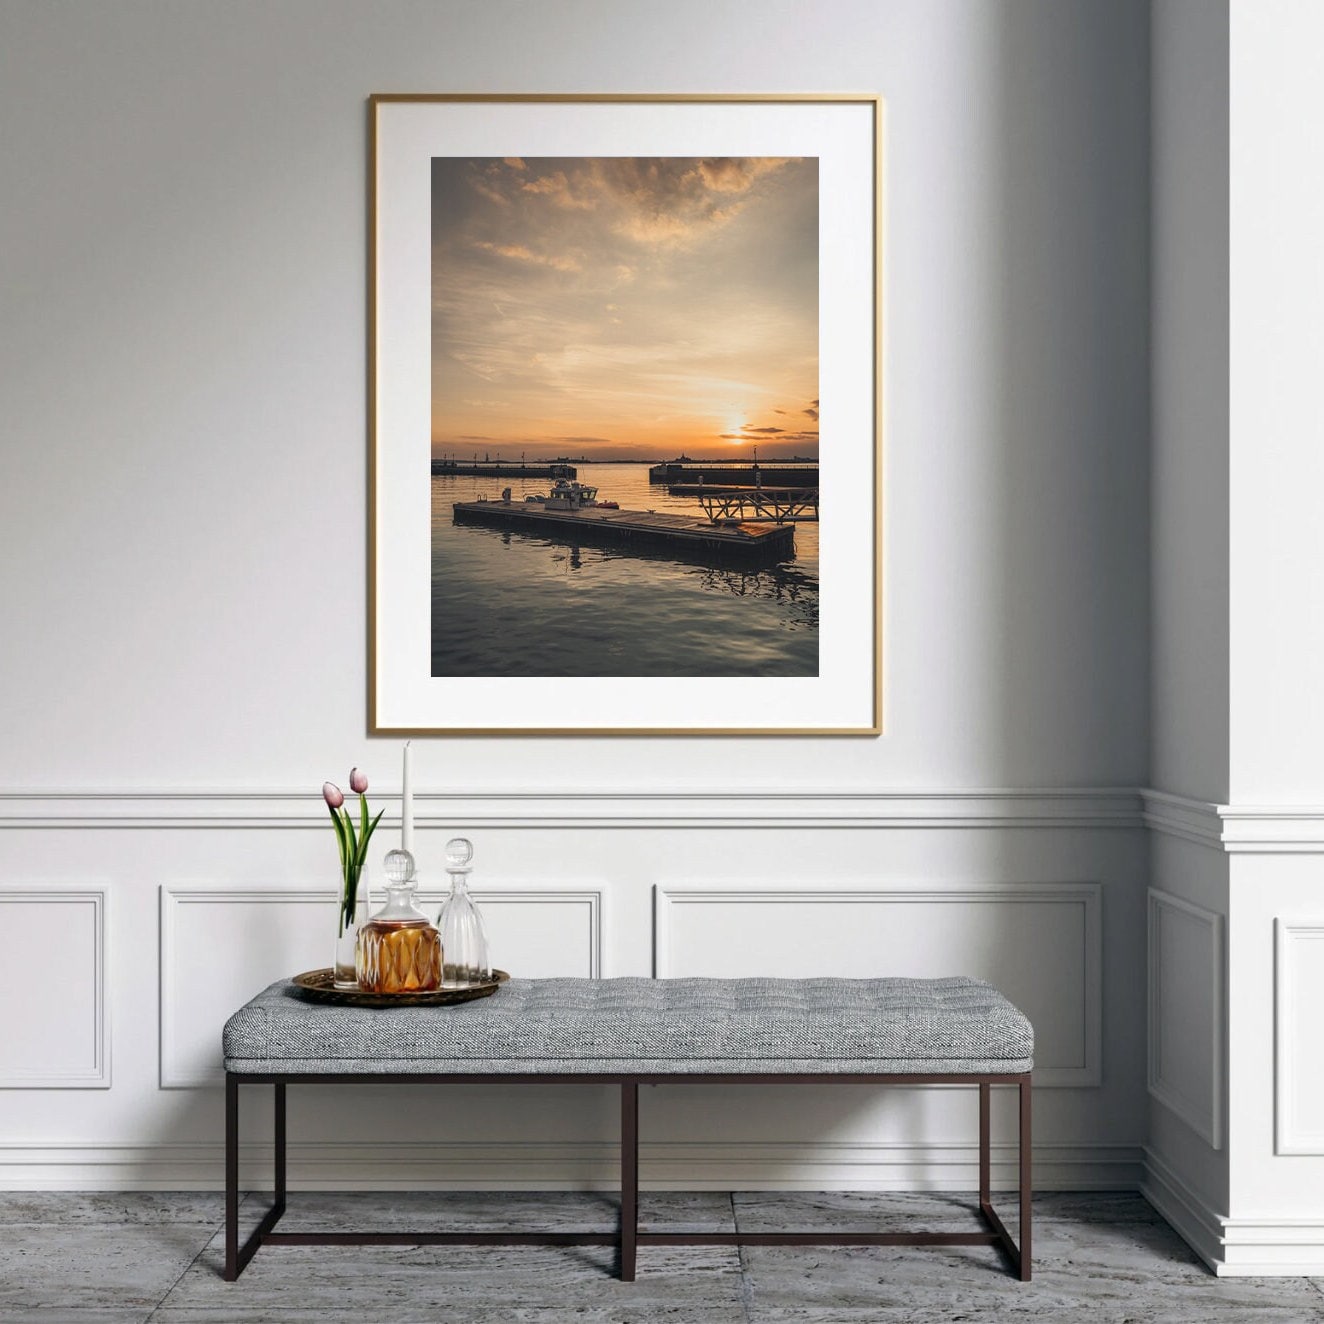 Battery Park Sunset Poster NYC Wall Art Dock Sunset Photography New York City Print Seaside Sunset Museum-quality Print Framed Photo Large